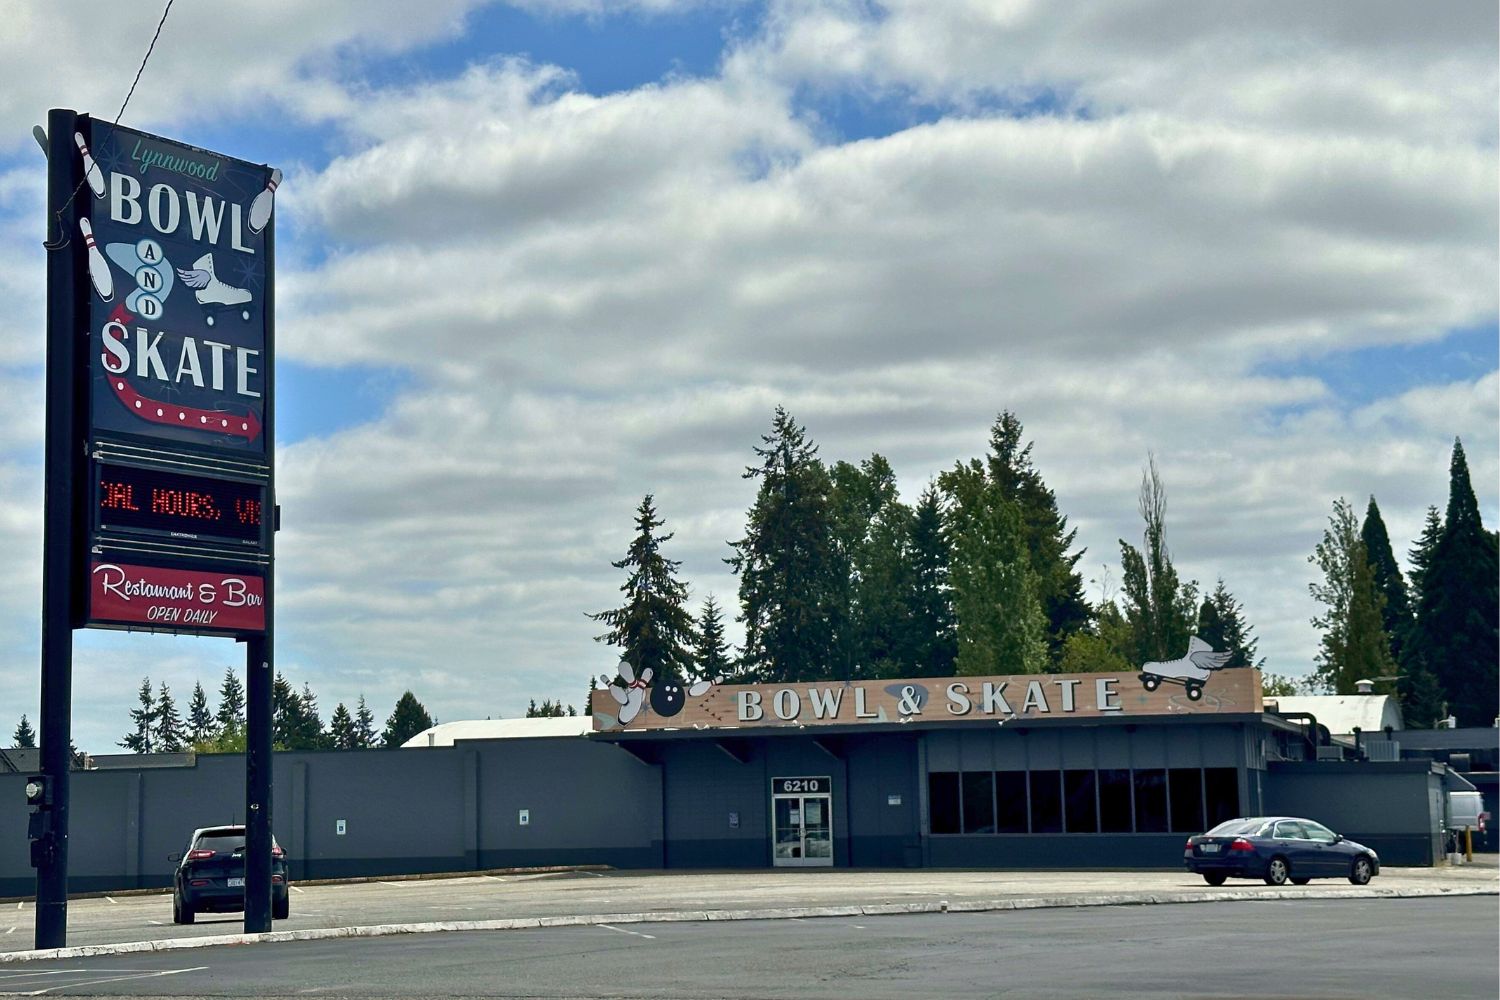 The outside of the  Lynnwood Bowl and Skate building in Lynnwood, WA.